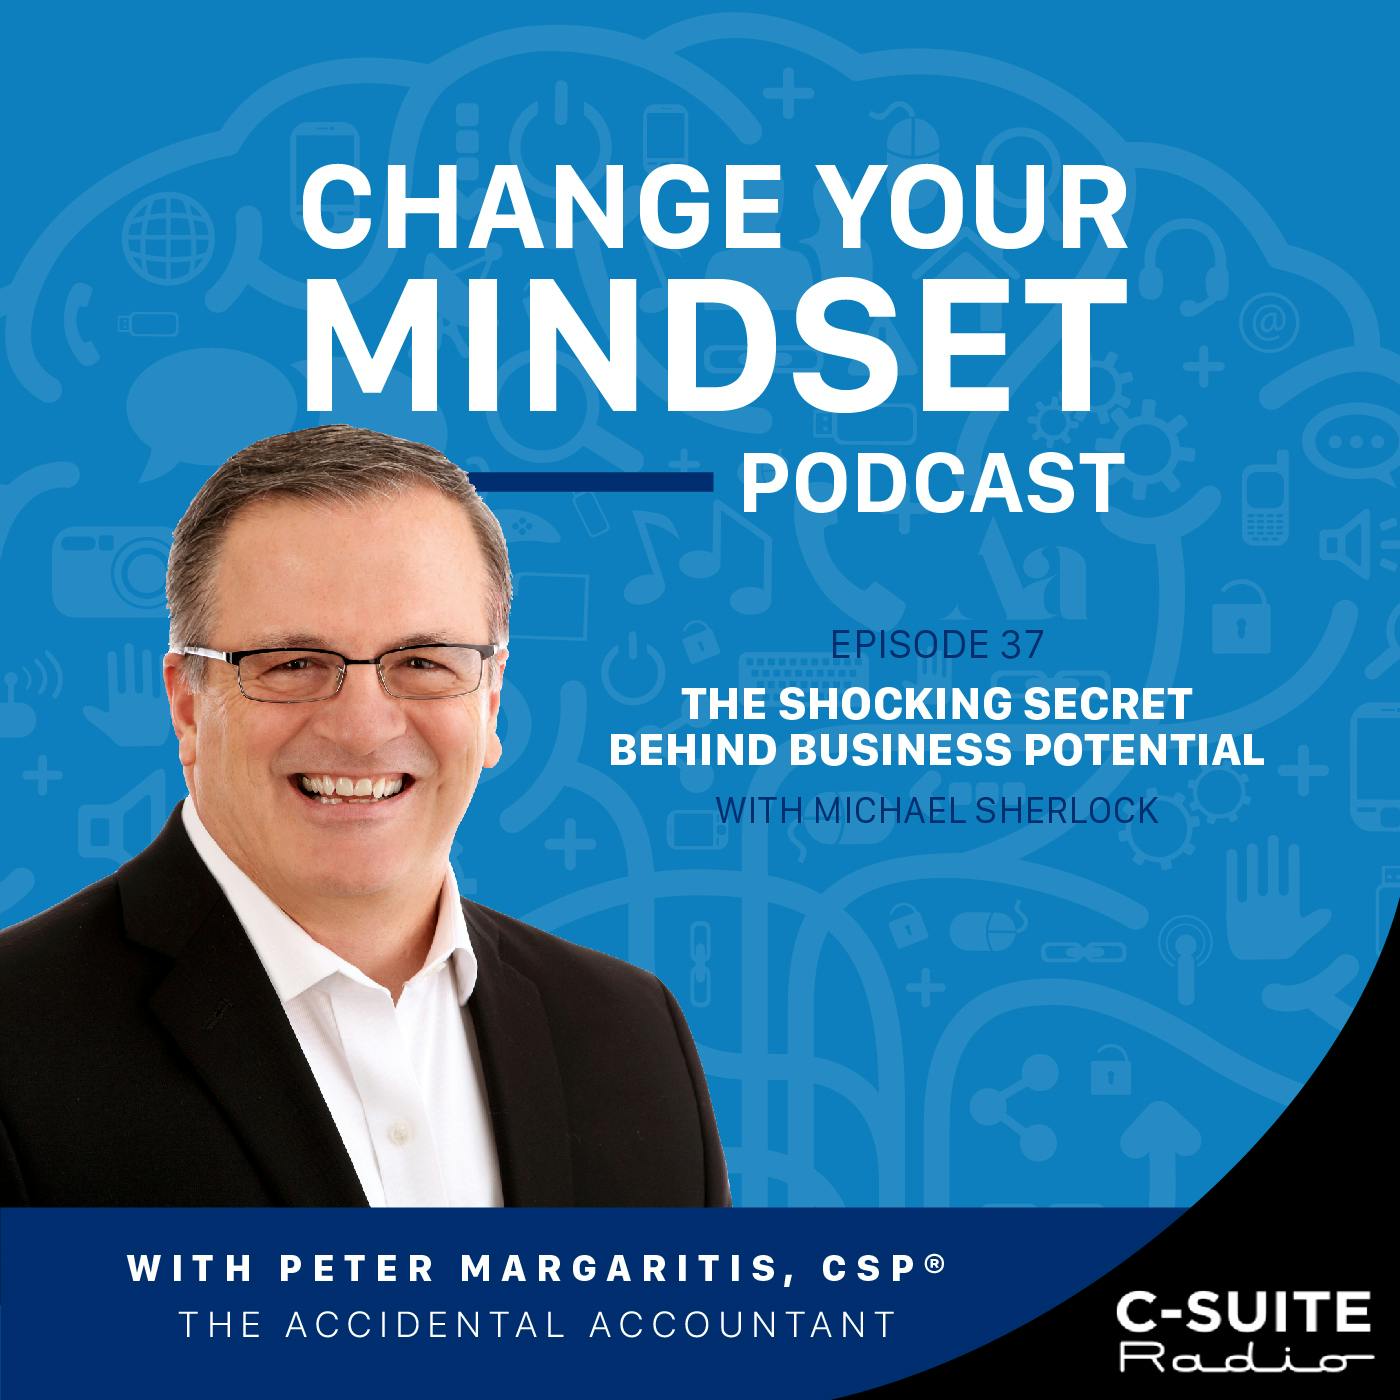 S4E37: The Shocking Secret Behind Business Potential